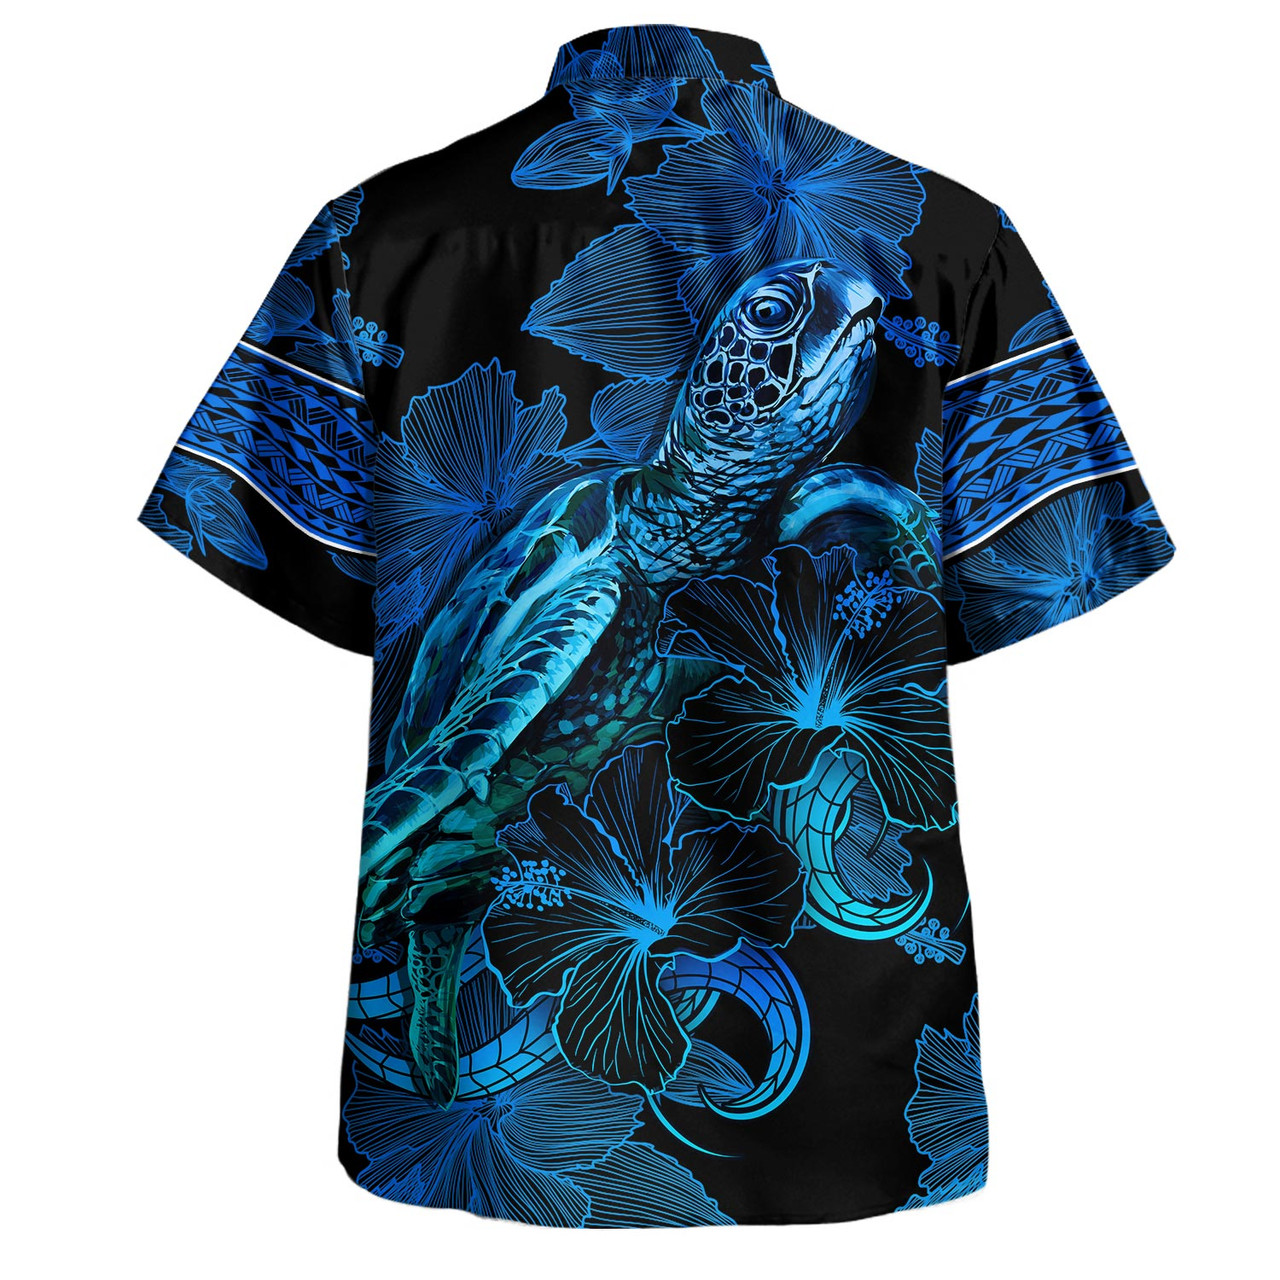 Samoa Combo Short Sleeve Dress And Shirt Sea Turtle With Blooming Hibiscus Flowers Tribal Blue